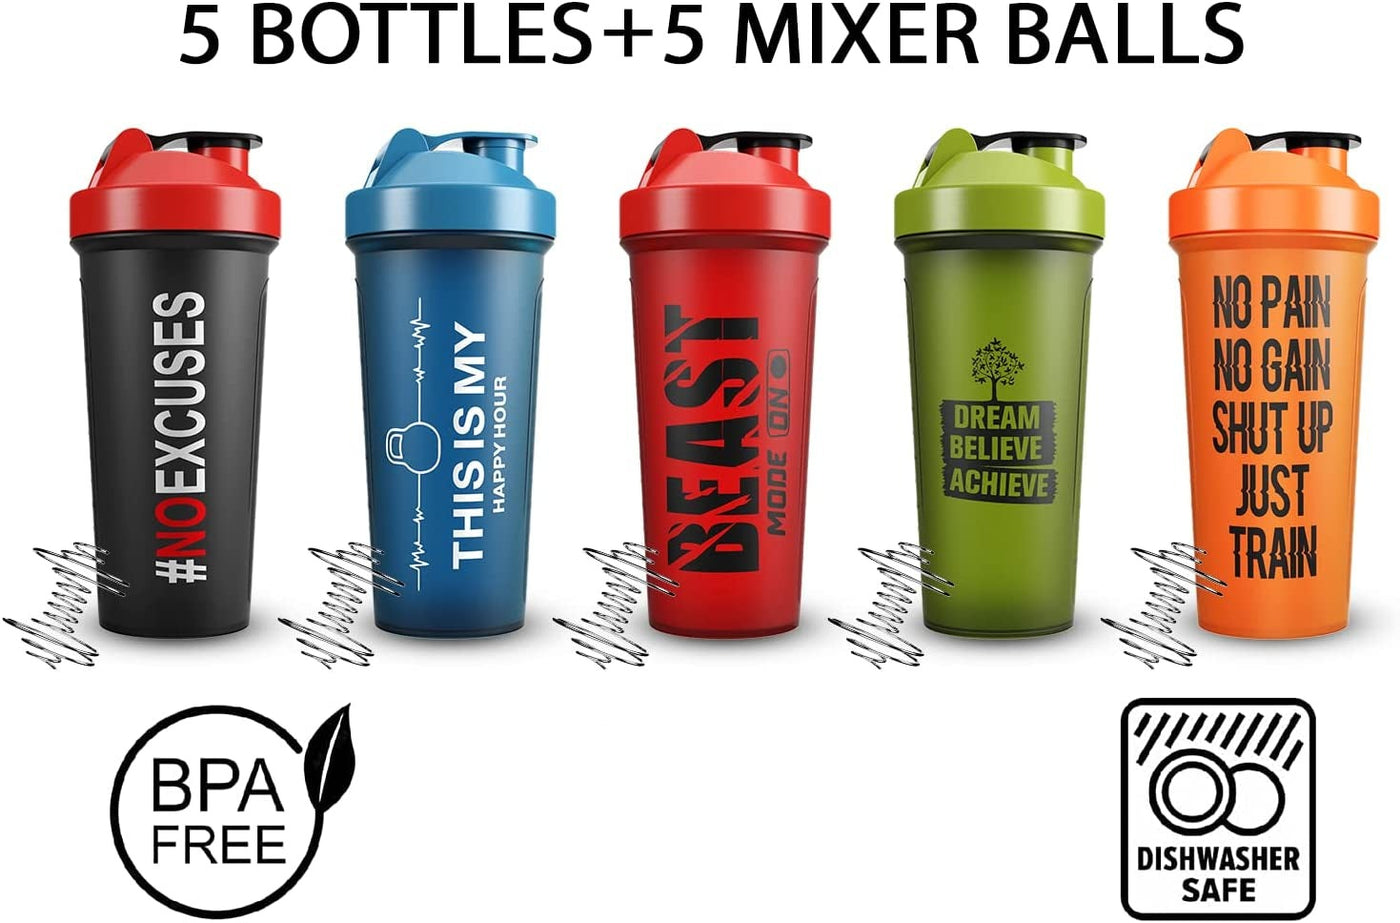 Pack of 5 Shaker Bottles for Protein Mixes, Water, Shakes & Smoothies -24oz each - Dishwasher Safe 